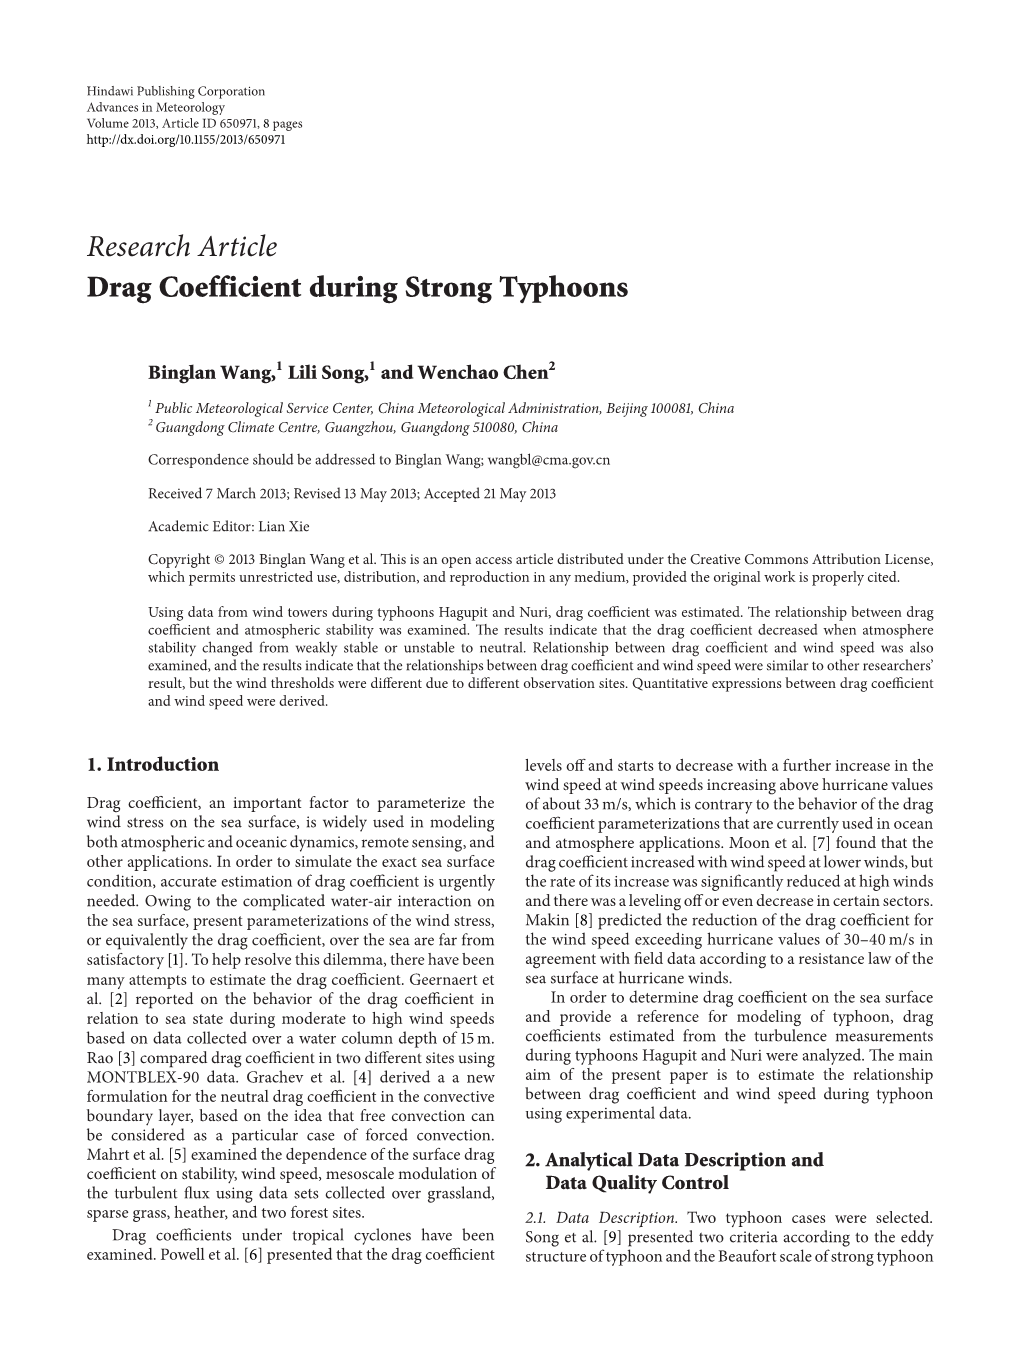 Drag Coefficient During Strong Typhoons